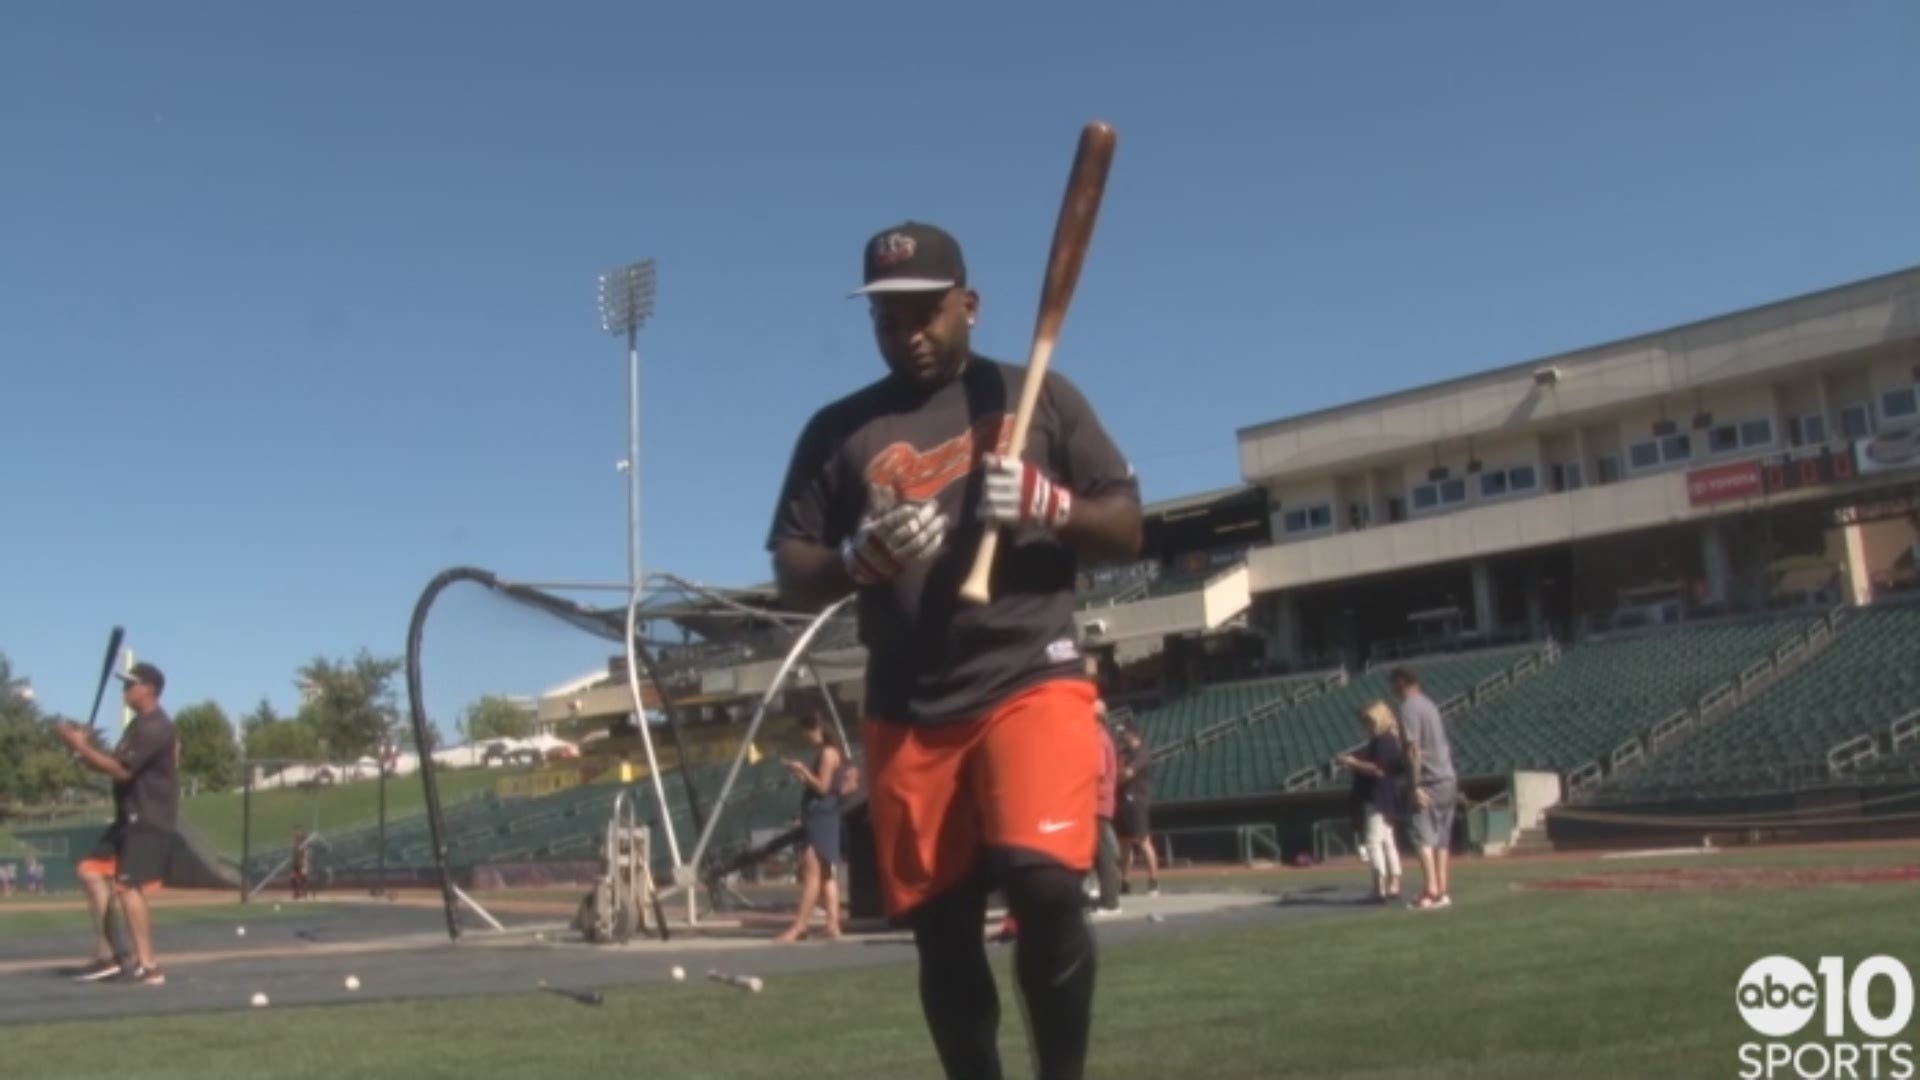 Pablo Sandoval arrived in Sacramento on Tuesday for his River Cats debut, as he works his way back to the big leagues and the San Francisco Giants.